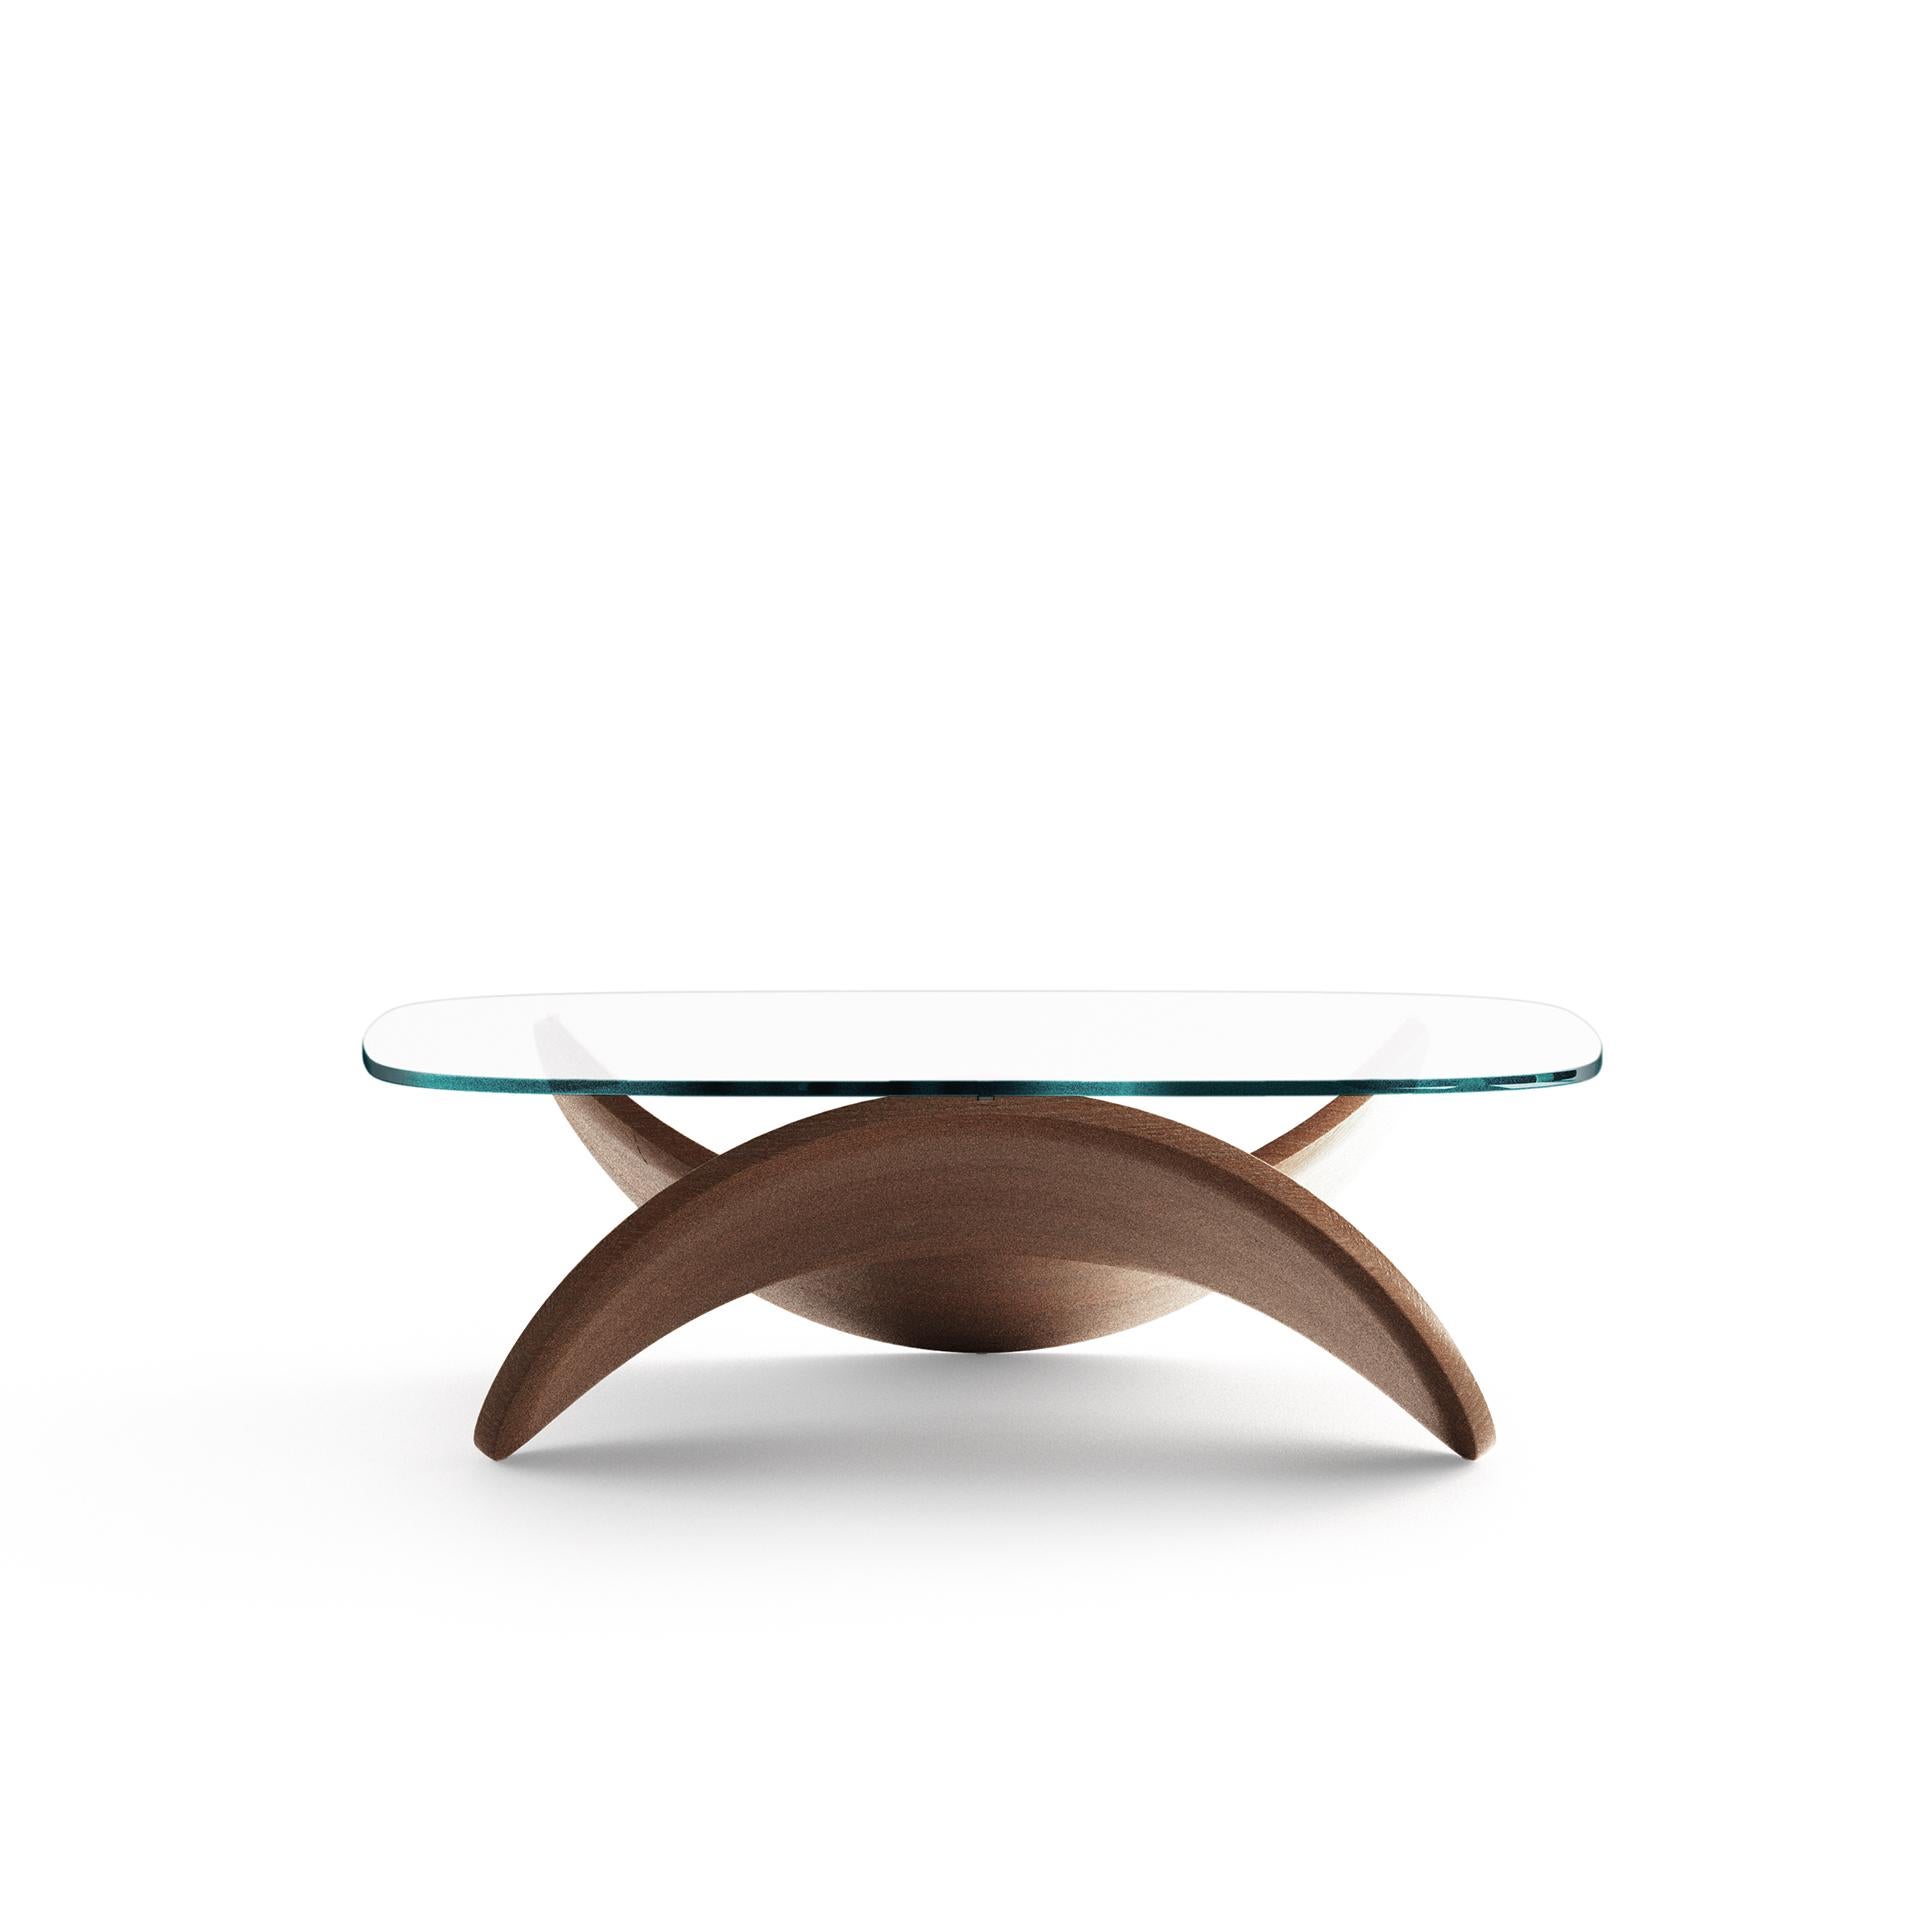 Italian Sculptural Wooden Coffee Table in a Natural Brown Stain and Glass Top, Italy For Sale